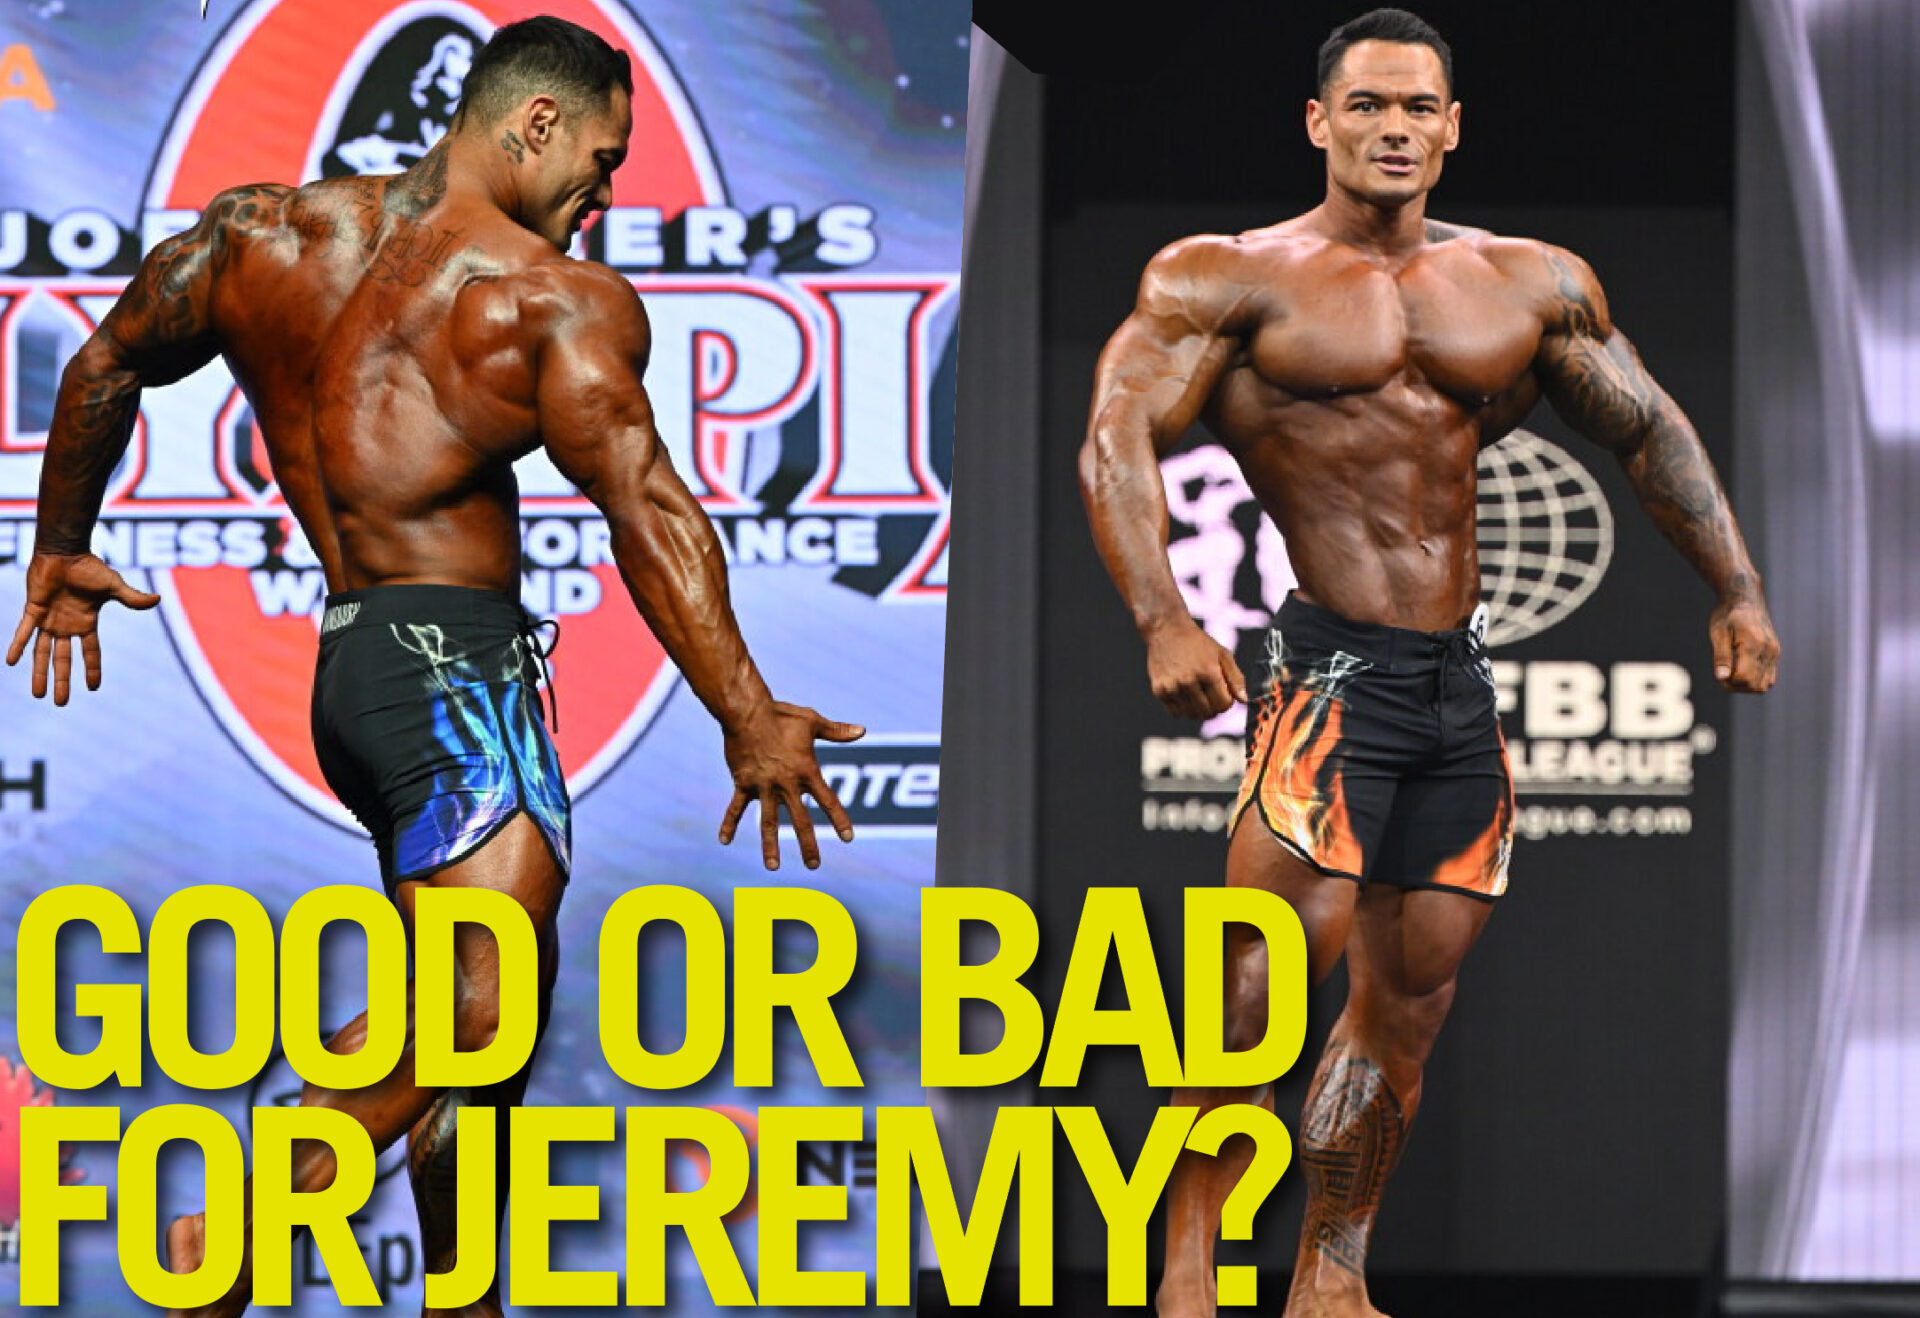 Good or Bad Move for Jeremy Buendia?